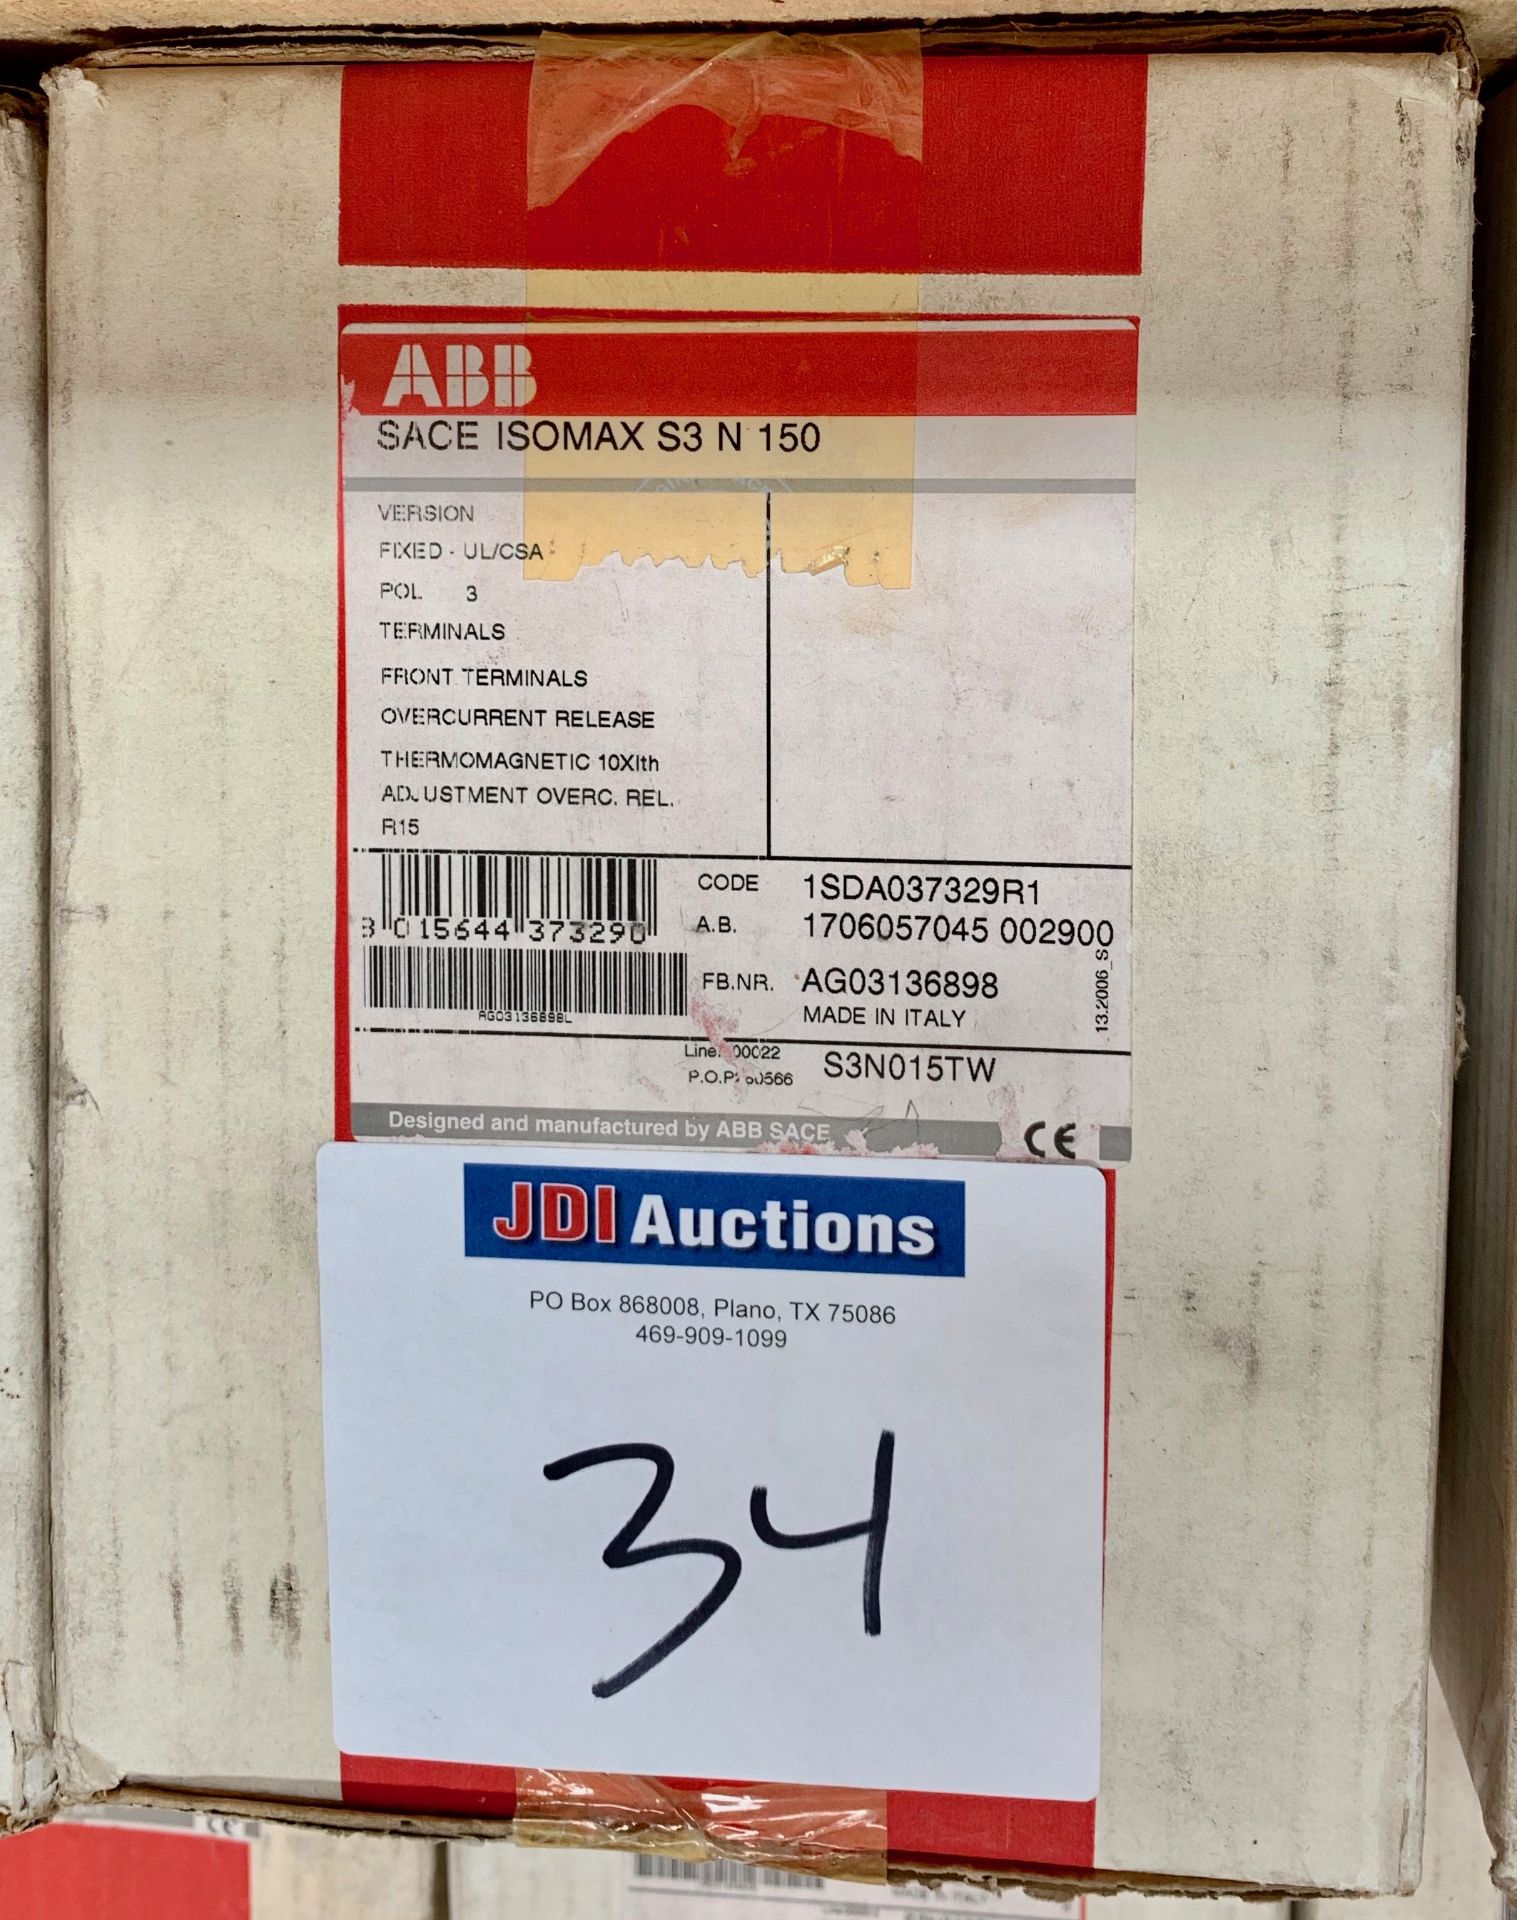 (3) ABB SACE ISOMAX S3N015TW Code 1SDA037329R1 15 Amp Circuit Breaker - new, never used - Qty. 3 - Image 2 of 2